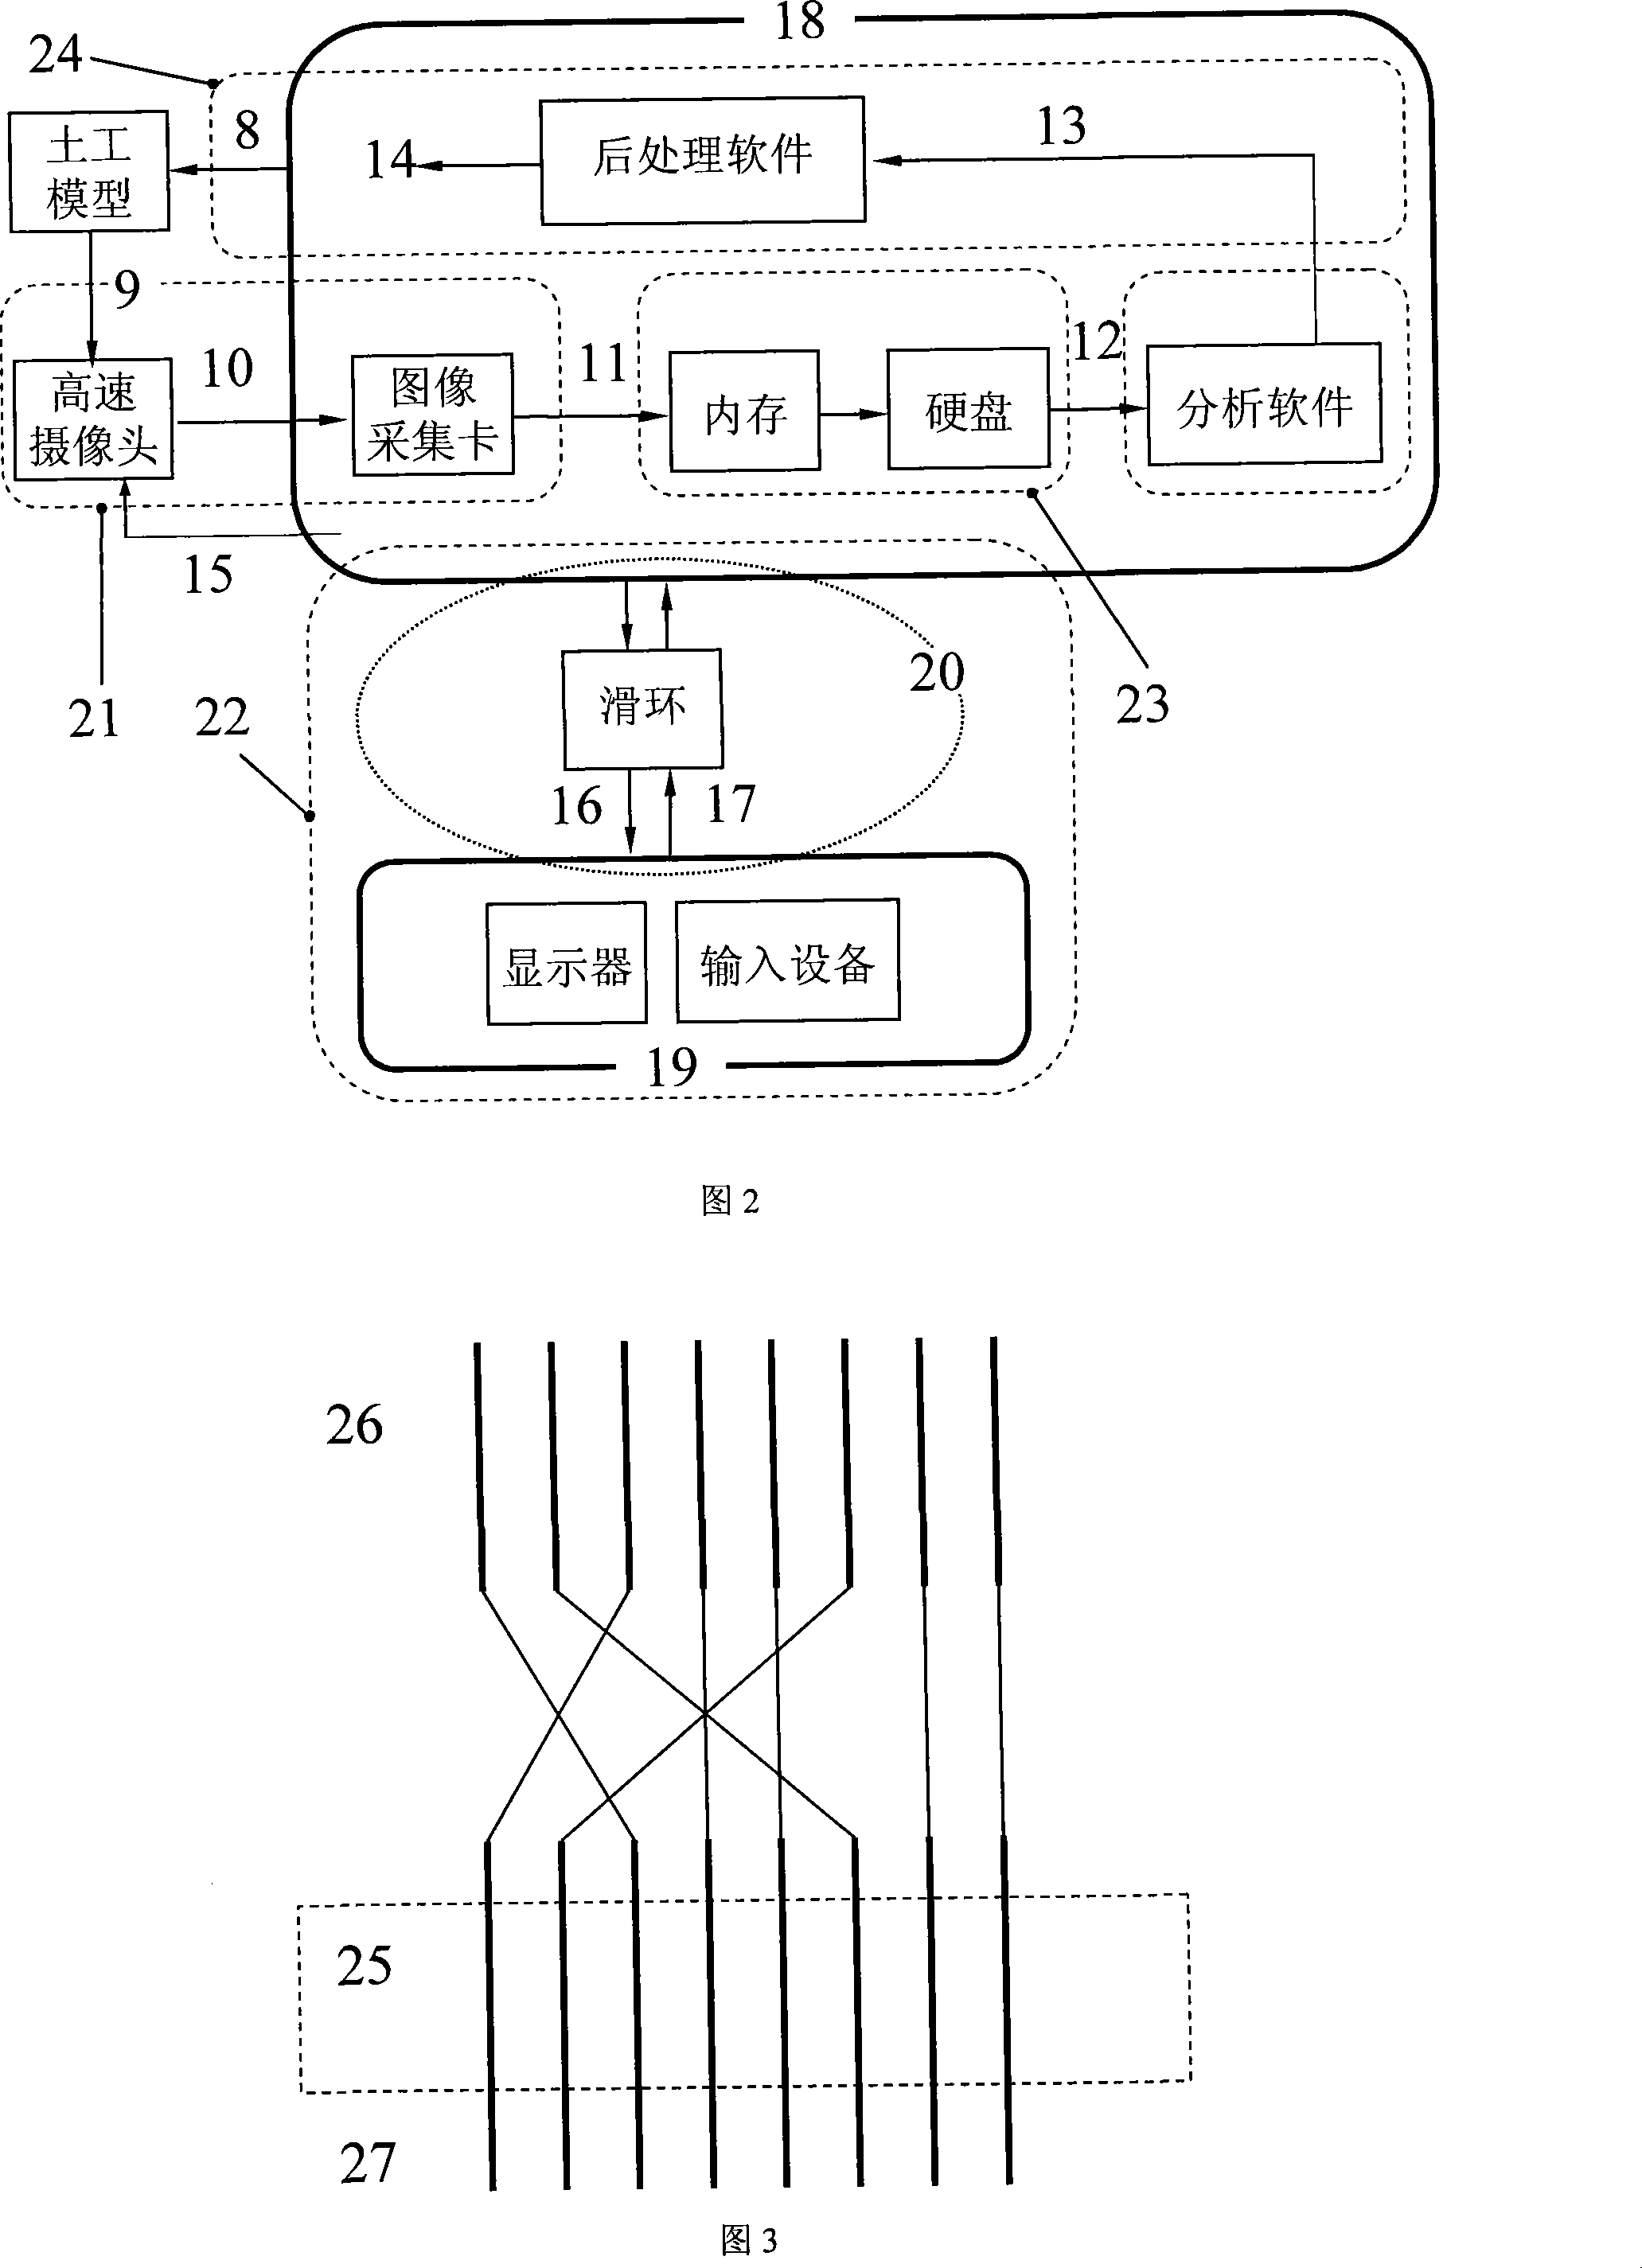 Soil body image real time capturing method and system used for centrifugal machine model trial